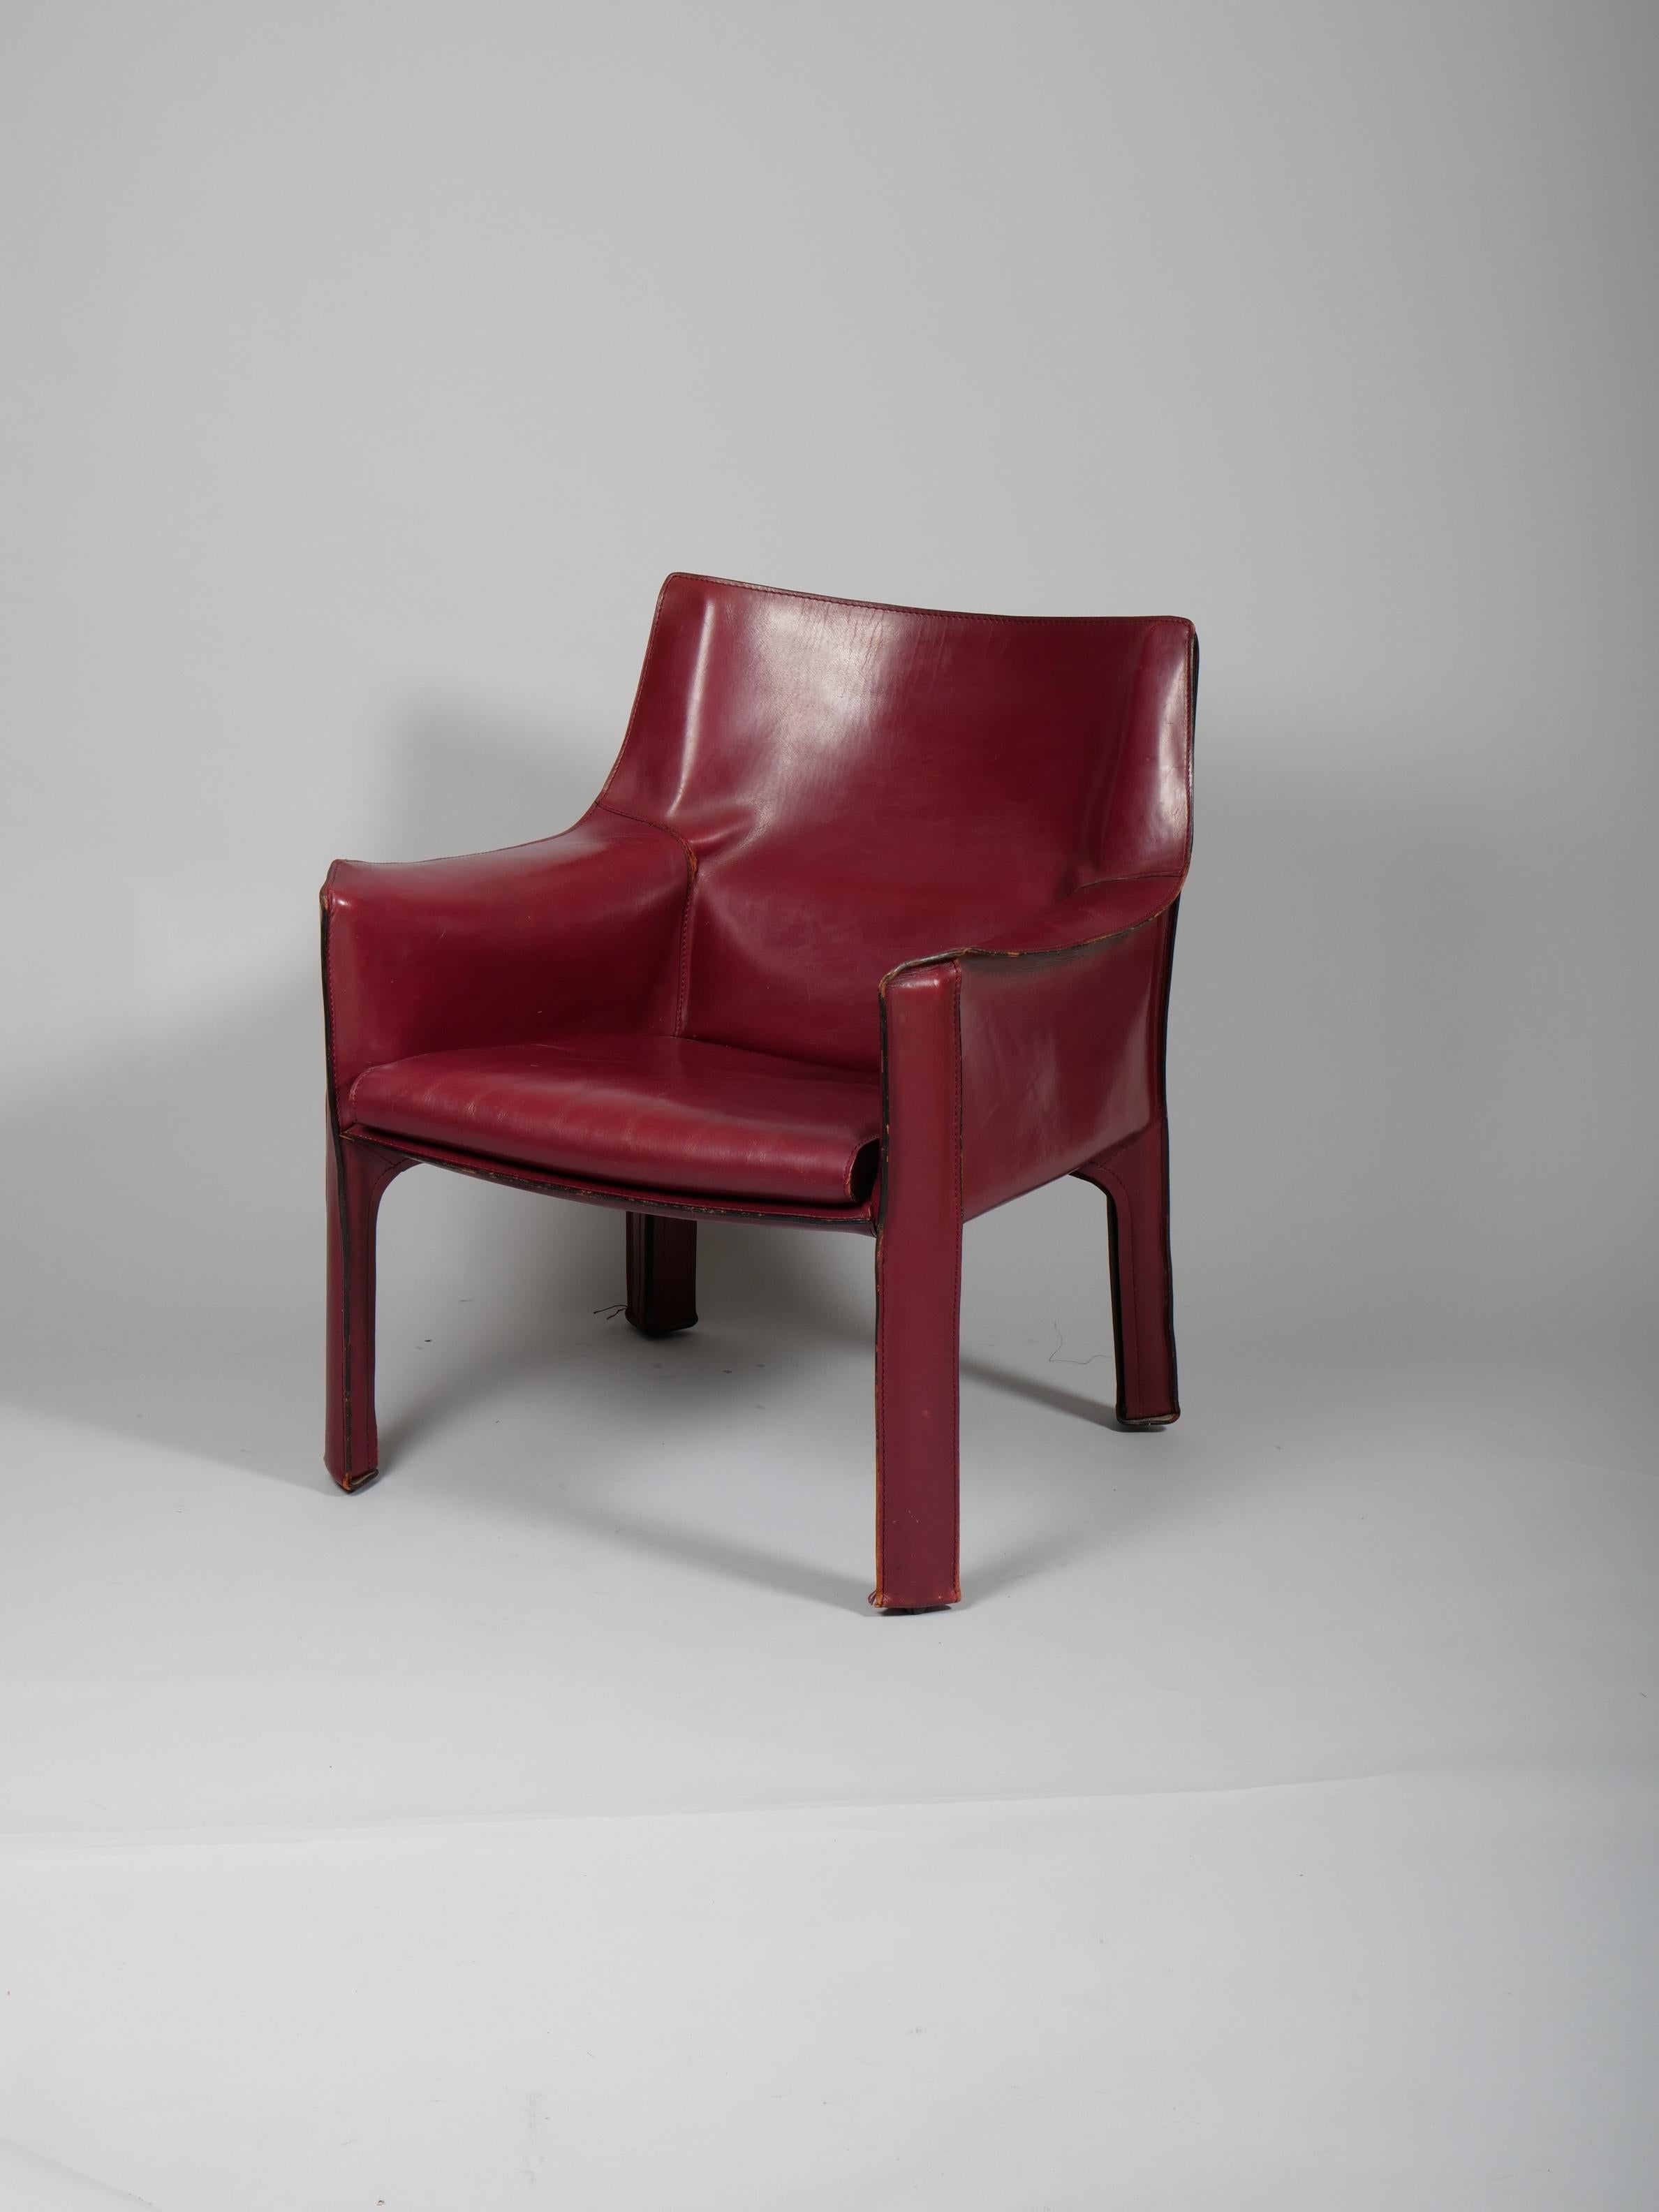 Late 20th Century Pair Mario Bellini China Red Leather Cab Chairs, Model 414 for Cassina Italy